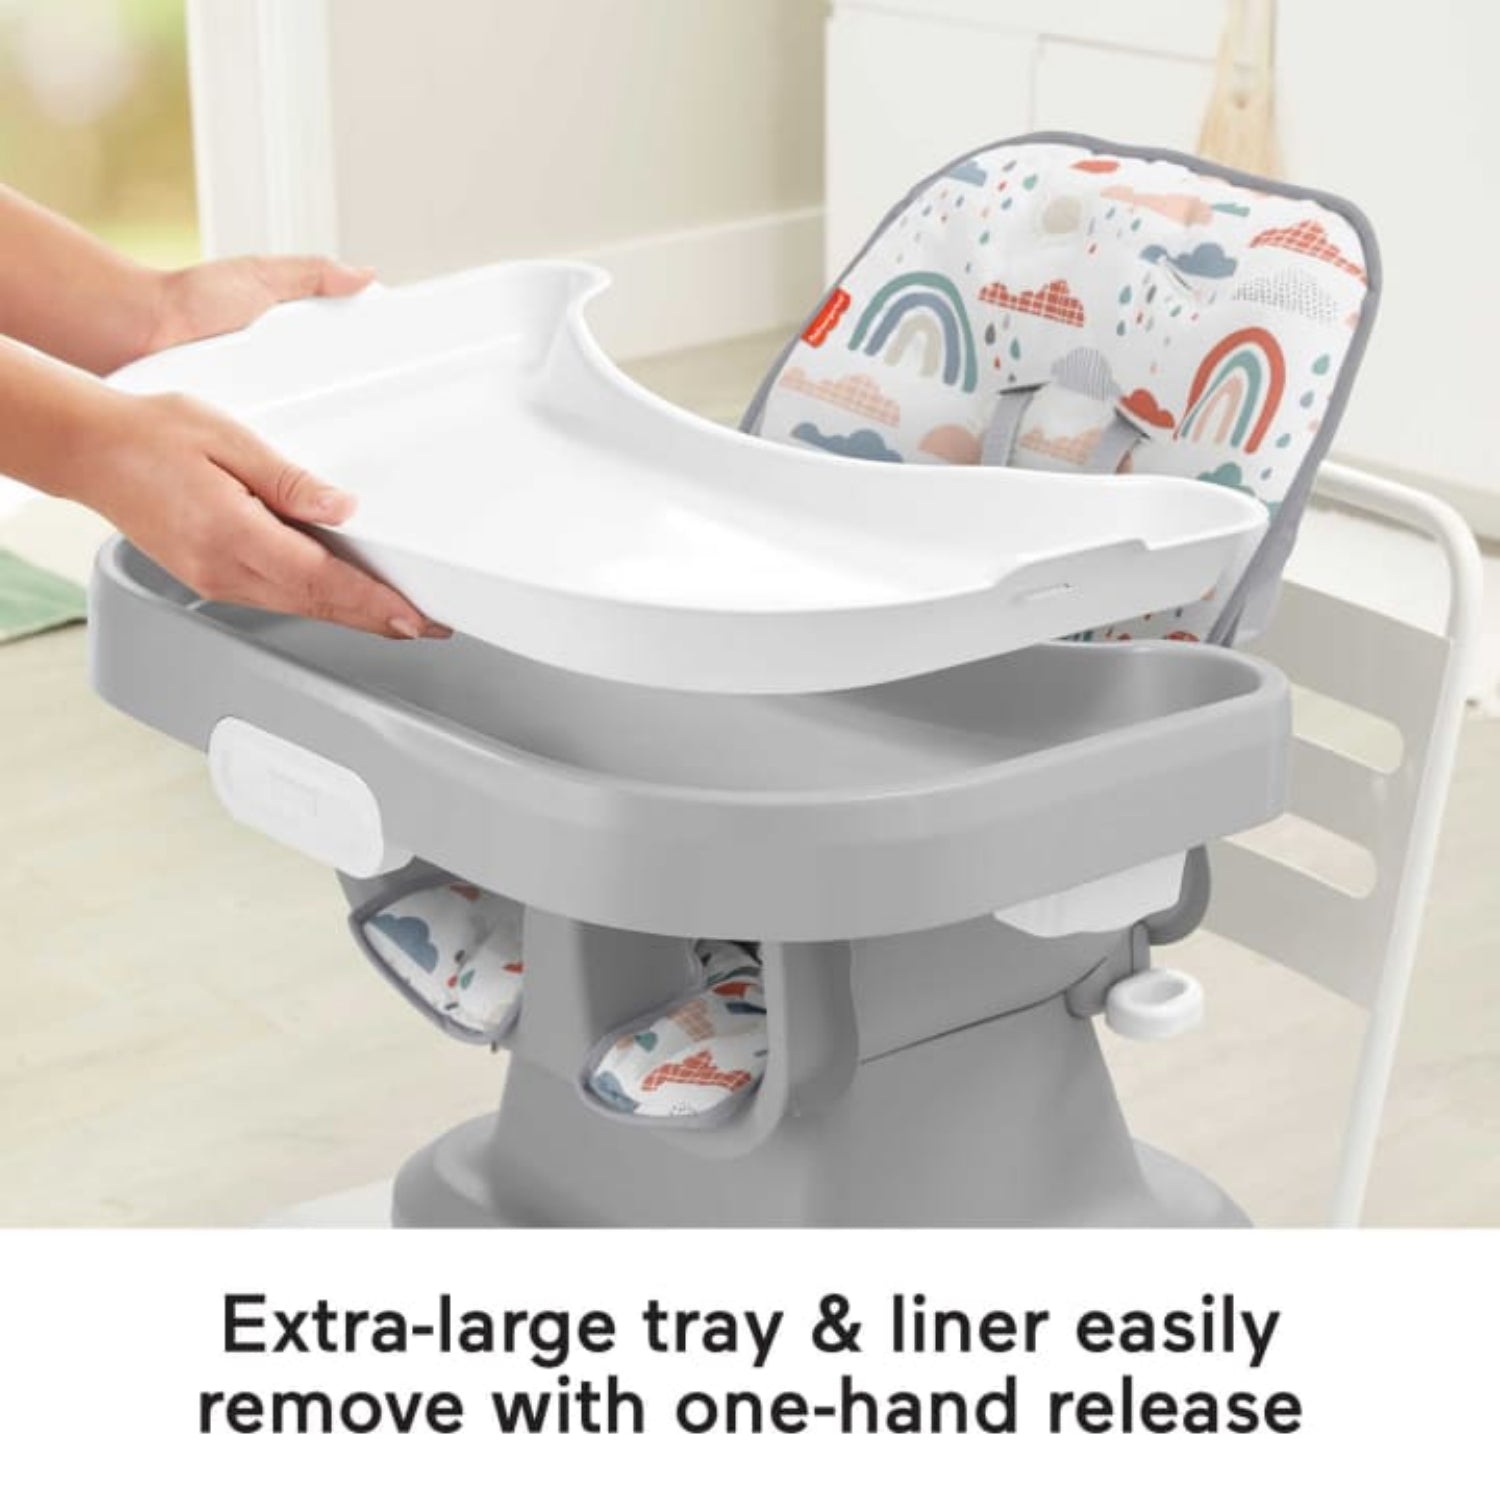 Fisher Price Spacesaver Simple Clean High Chair